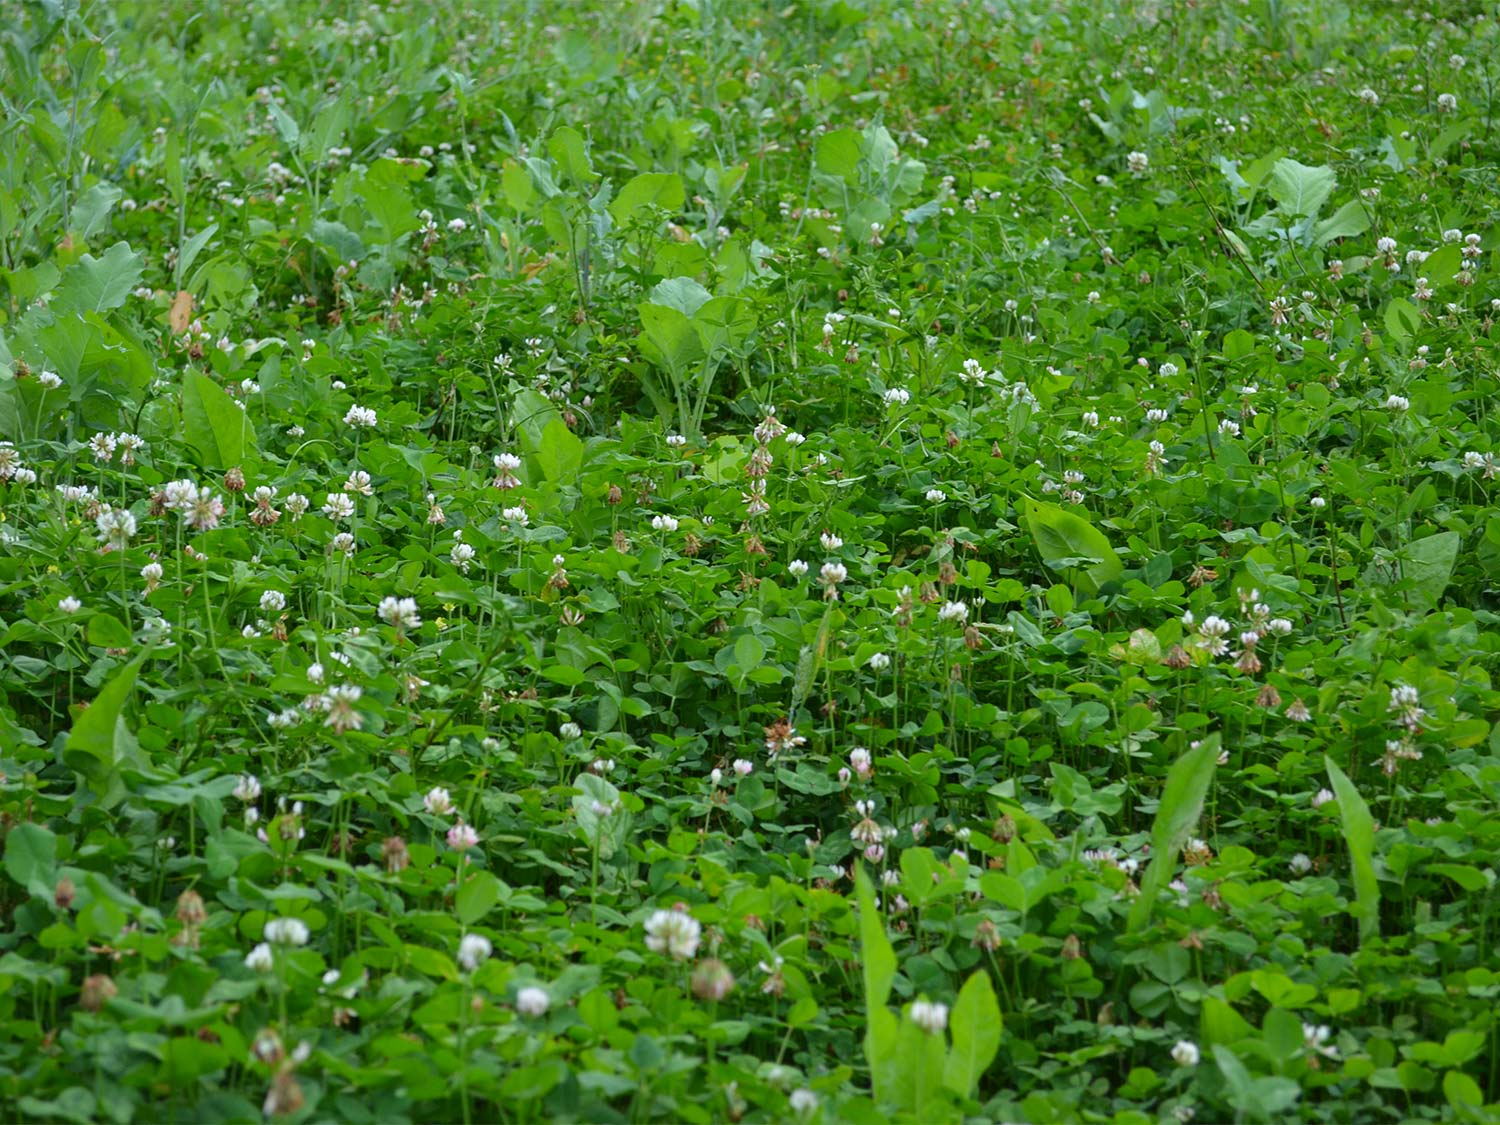 A small field full of clovers for deer.